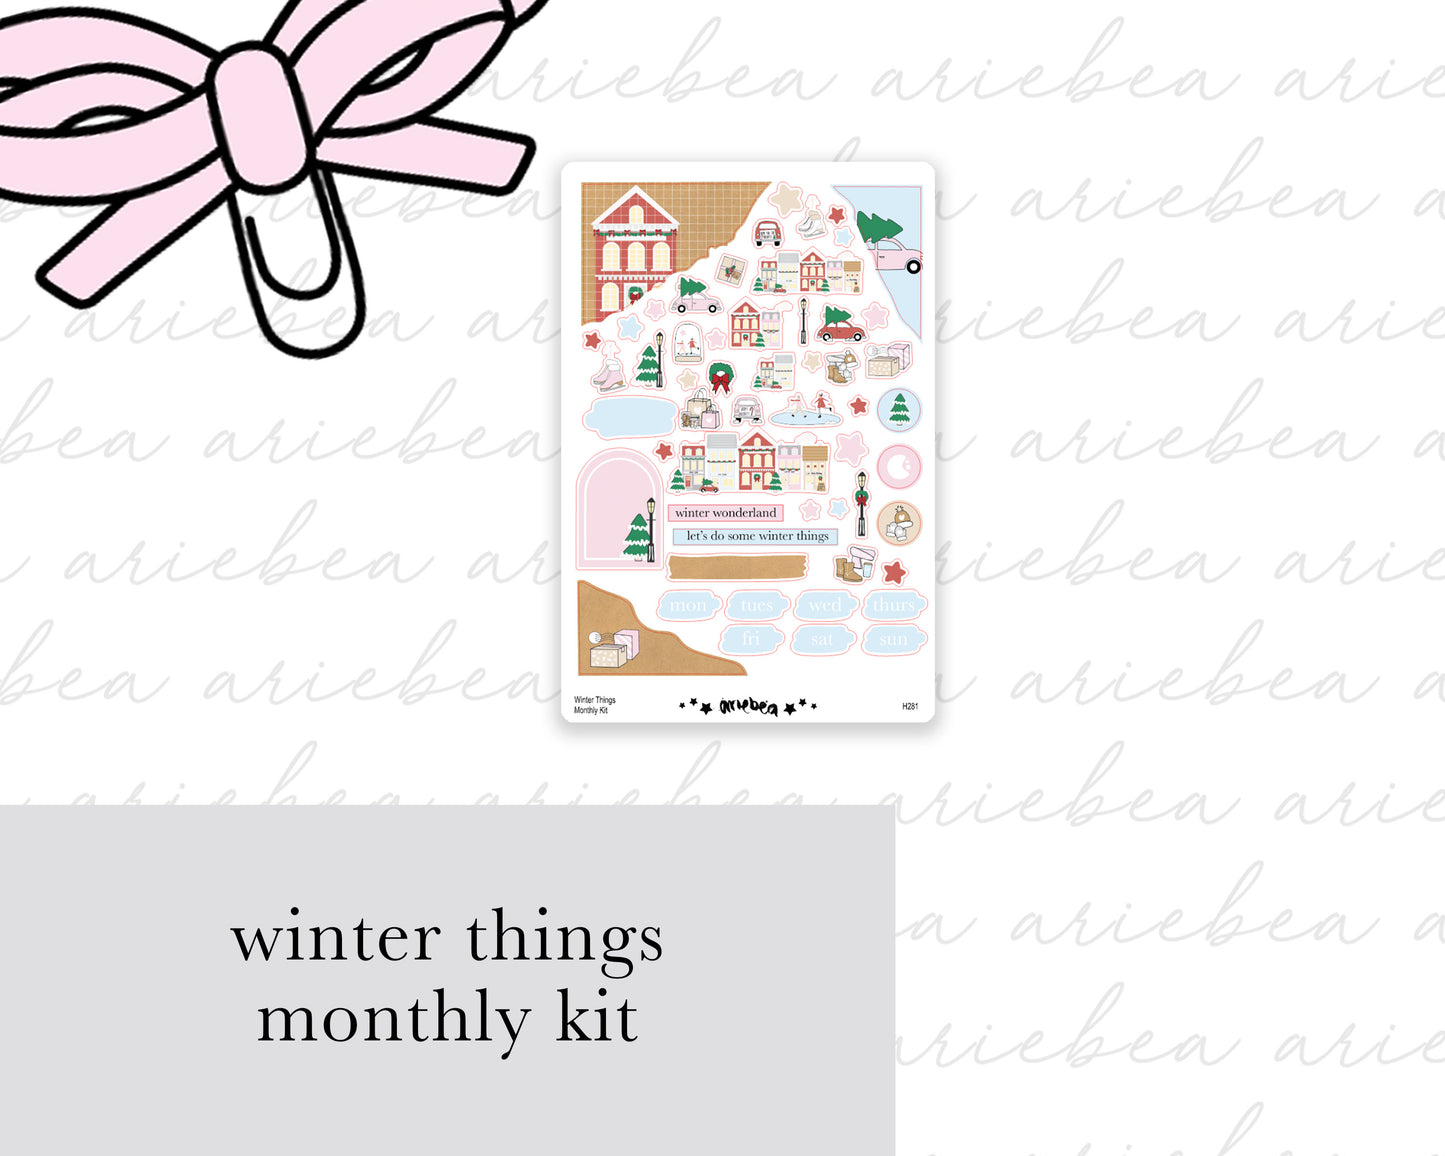 Winter Things Collection Full Kit